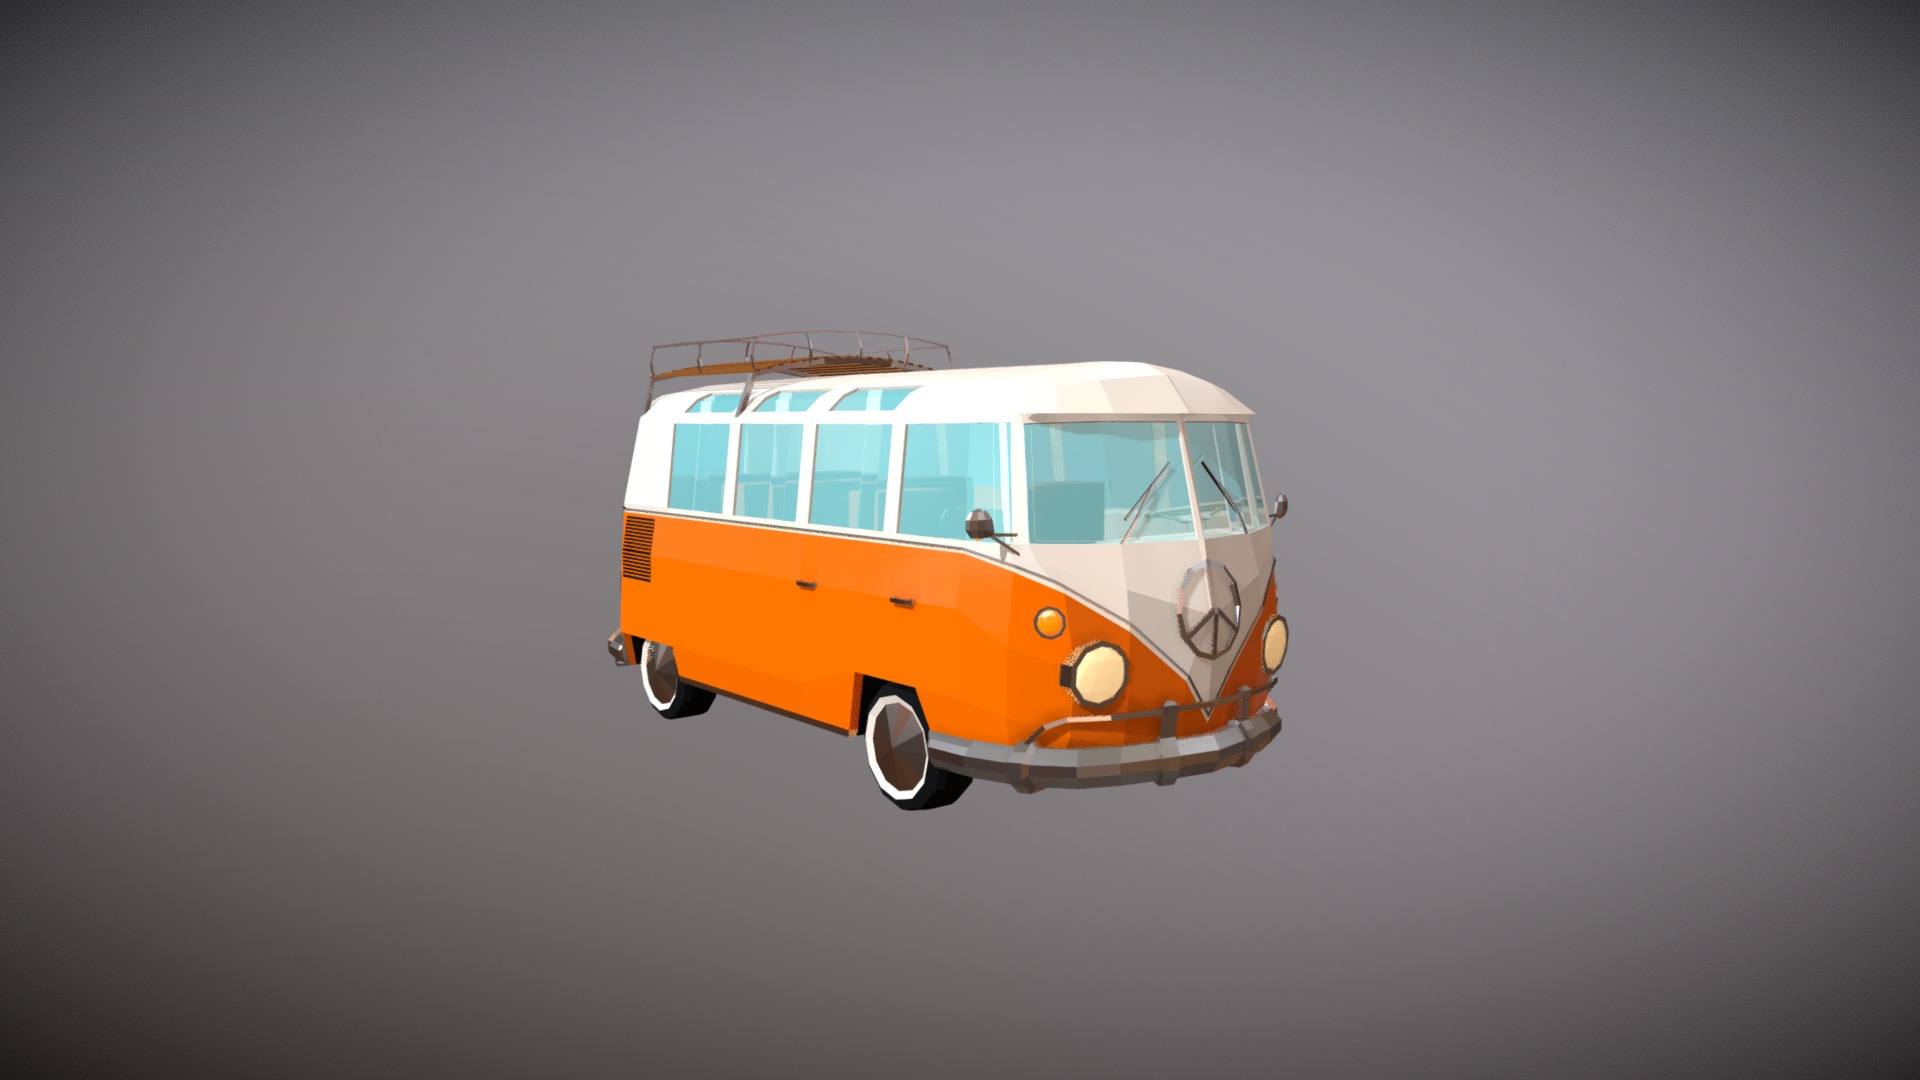 3D model Low Poly Camper Van 1 - This is a 3D model of the Low Poly Camper Van 1. The 3D model is about a small orange and white bus.